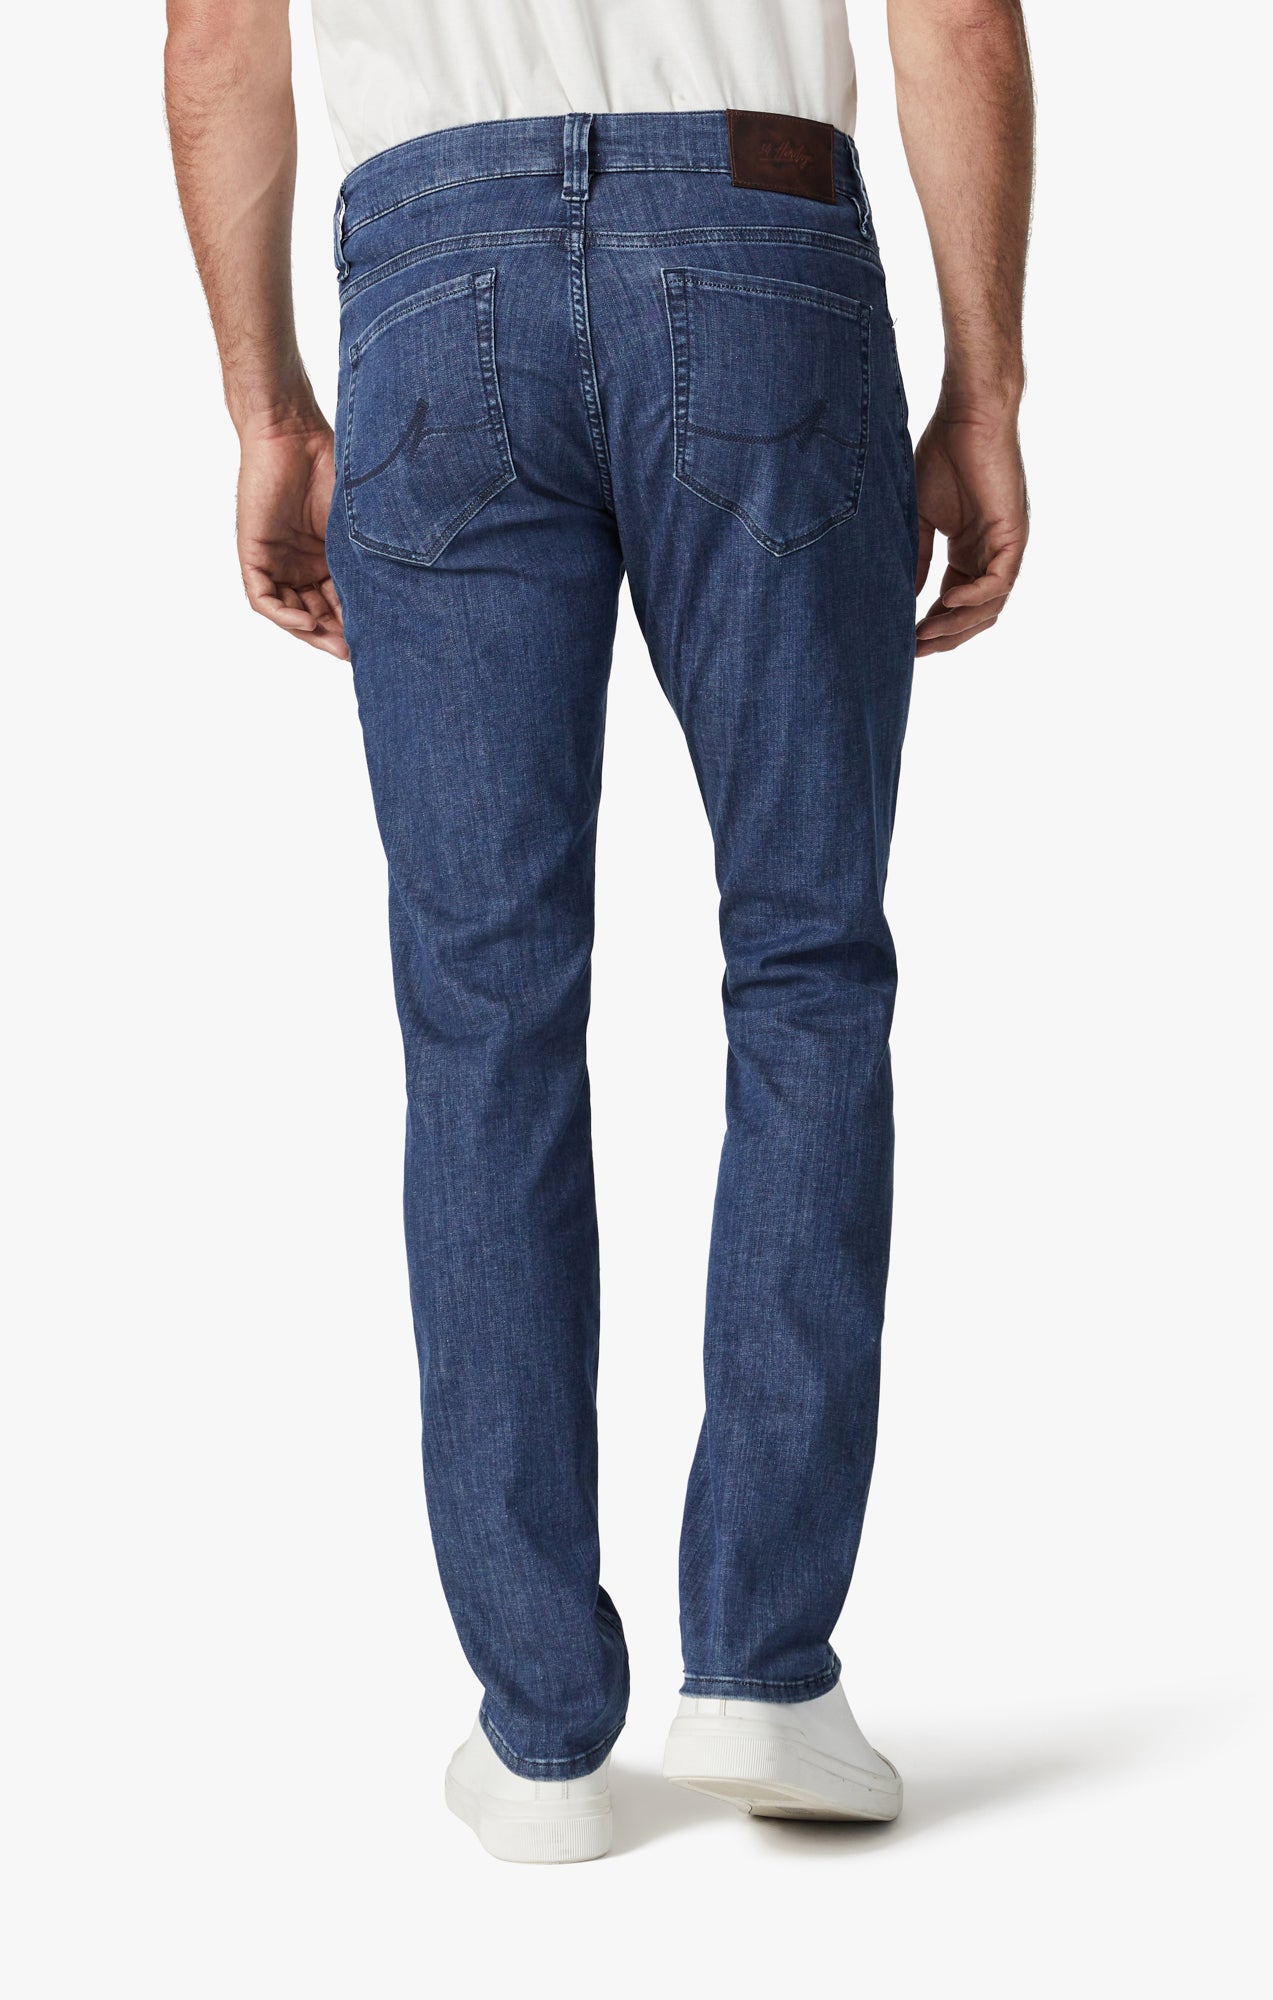 Courage Straight Leg Jeans In Mid Kona